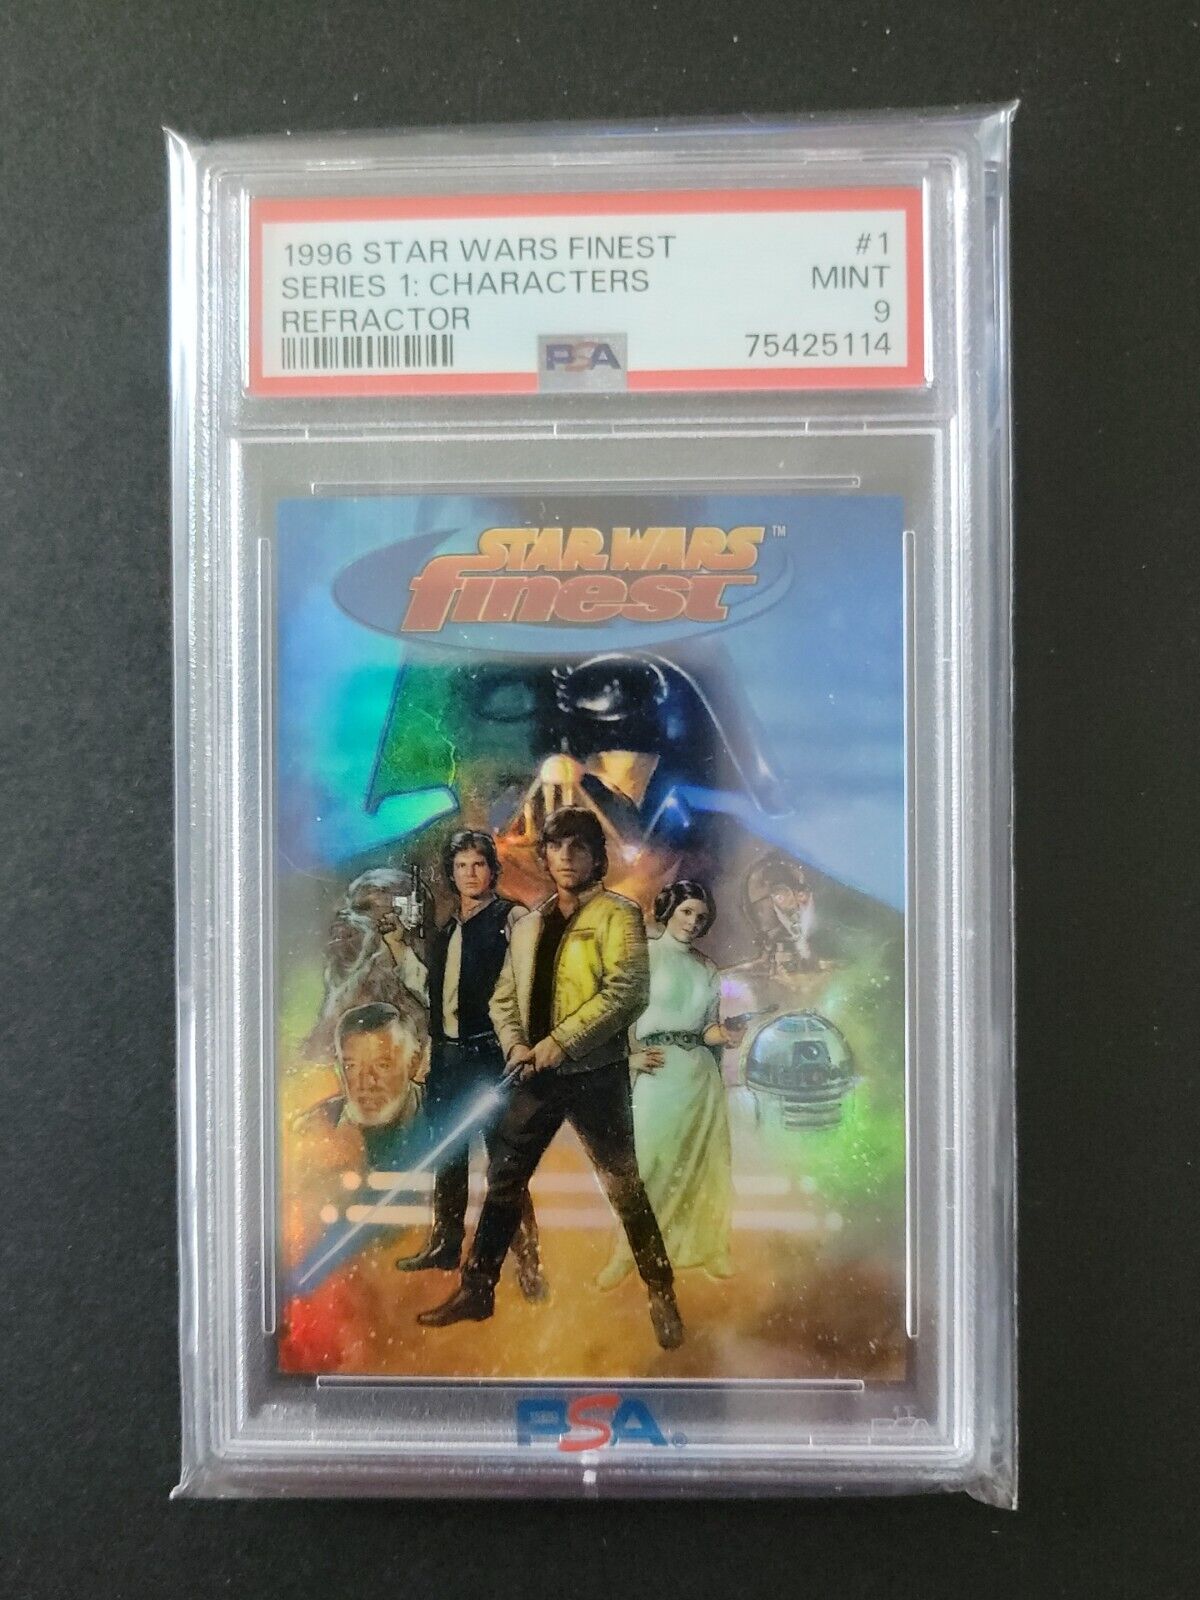 1996 Topps Star Wars Finest #1 Series 1: Characters PSA 9 Mint REFRACTOR 